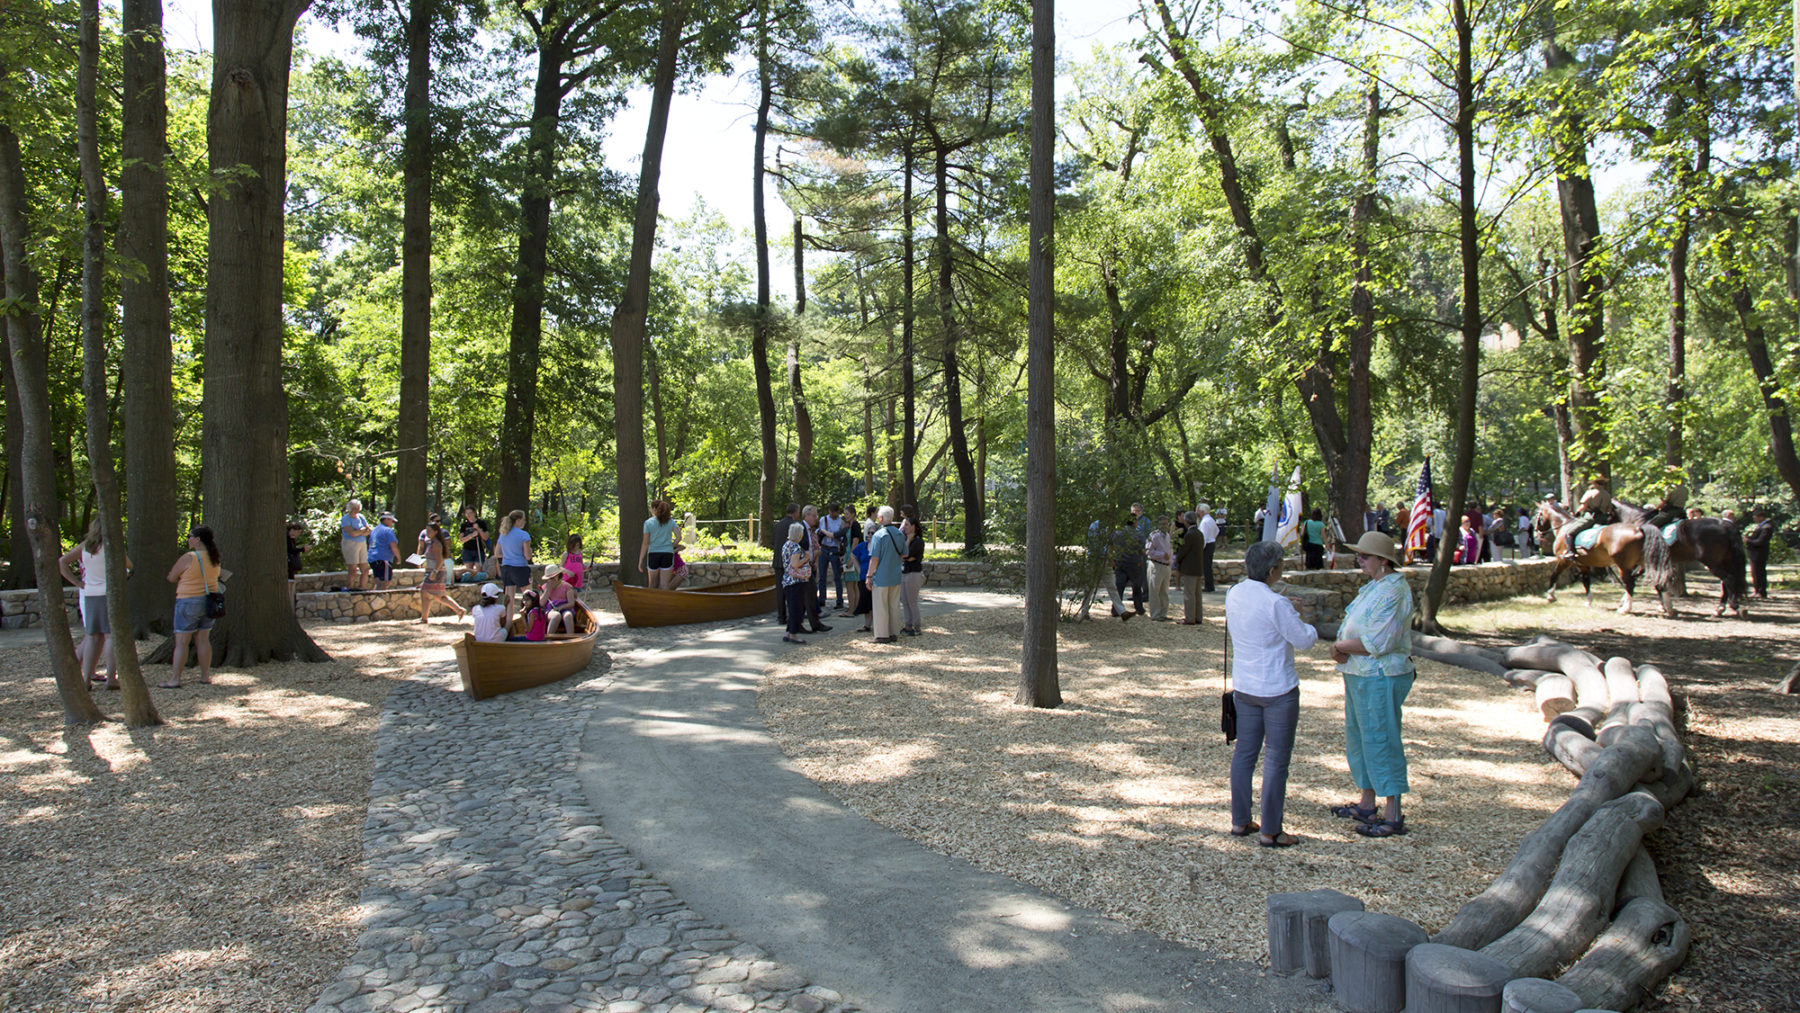 People enjoying new park in clearing in the woods